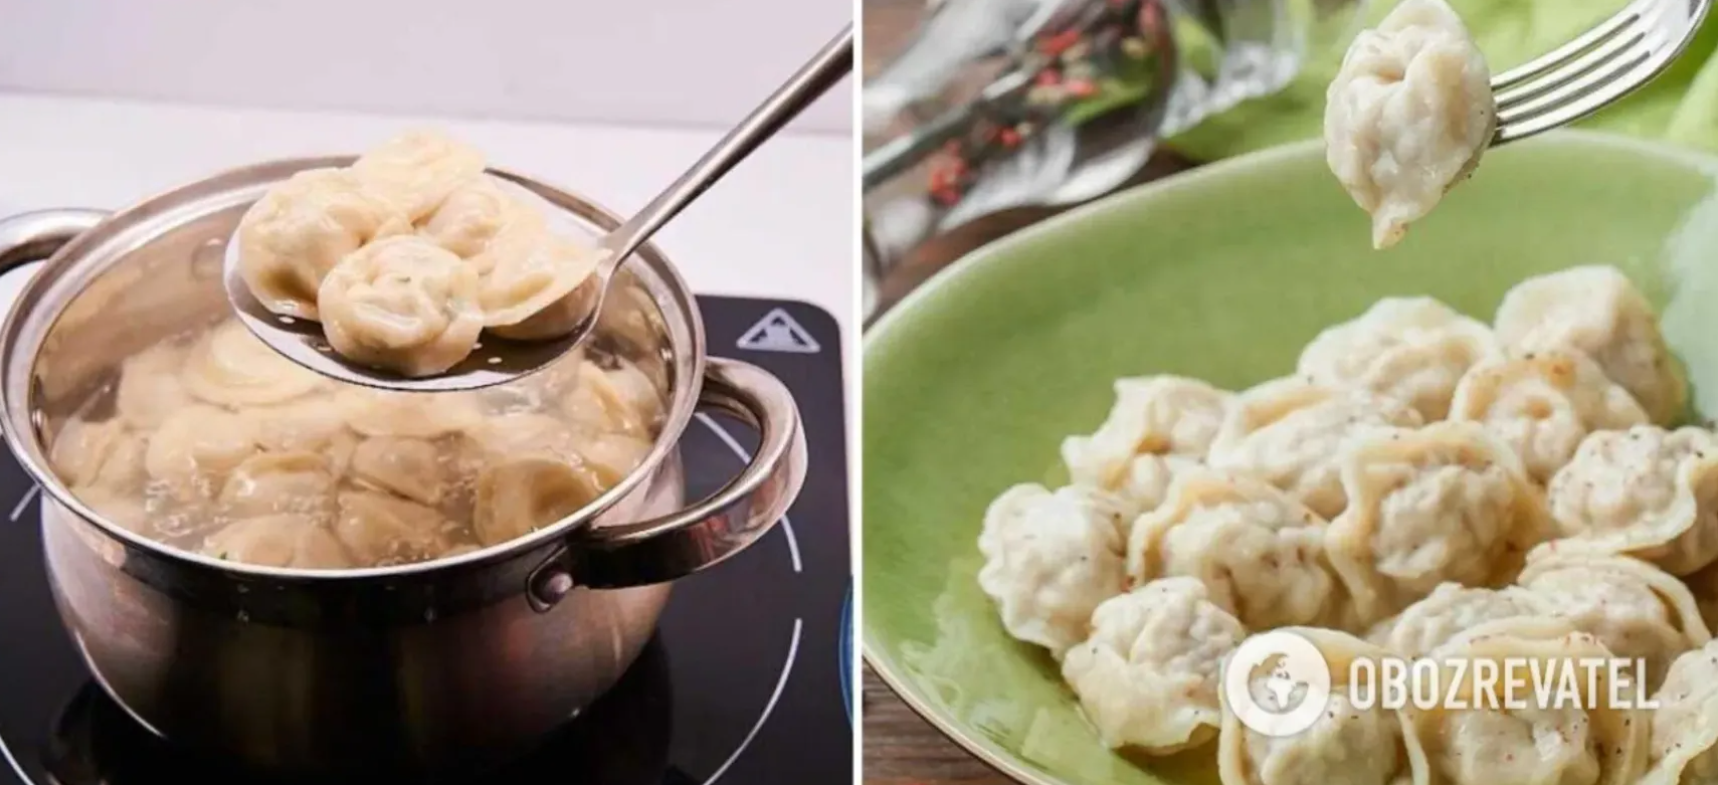 How to cook dumplings properly